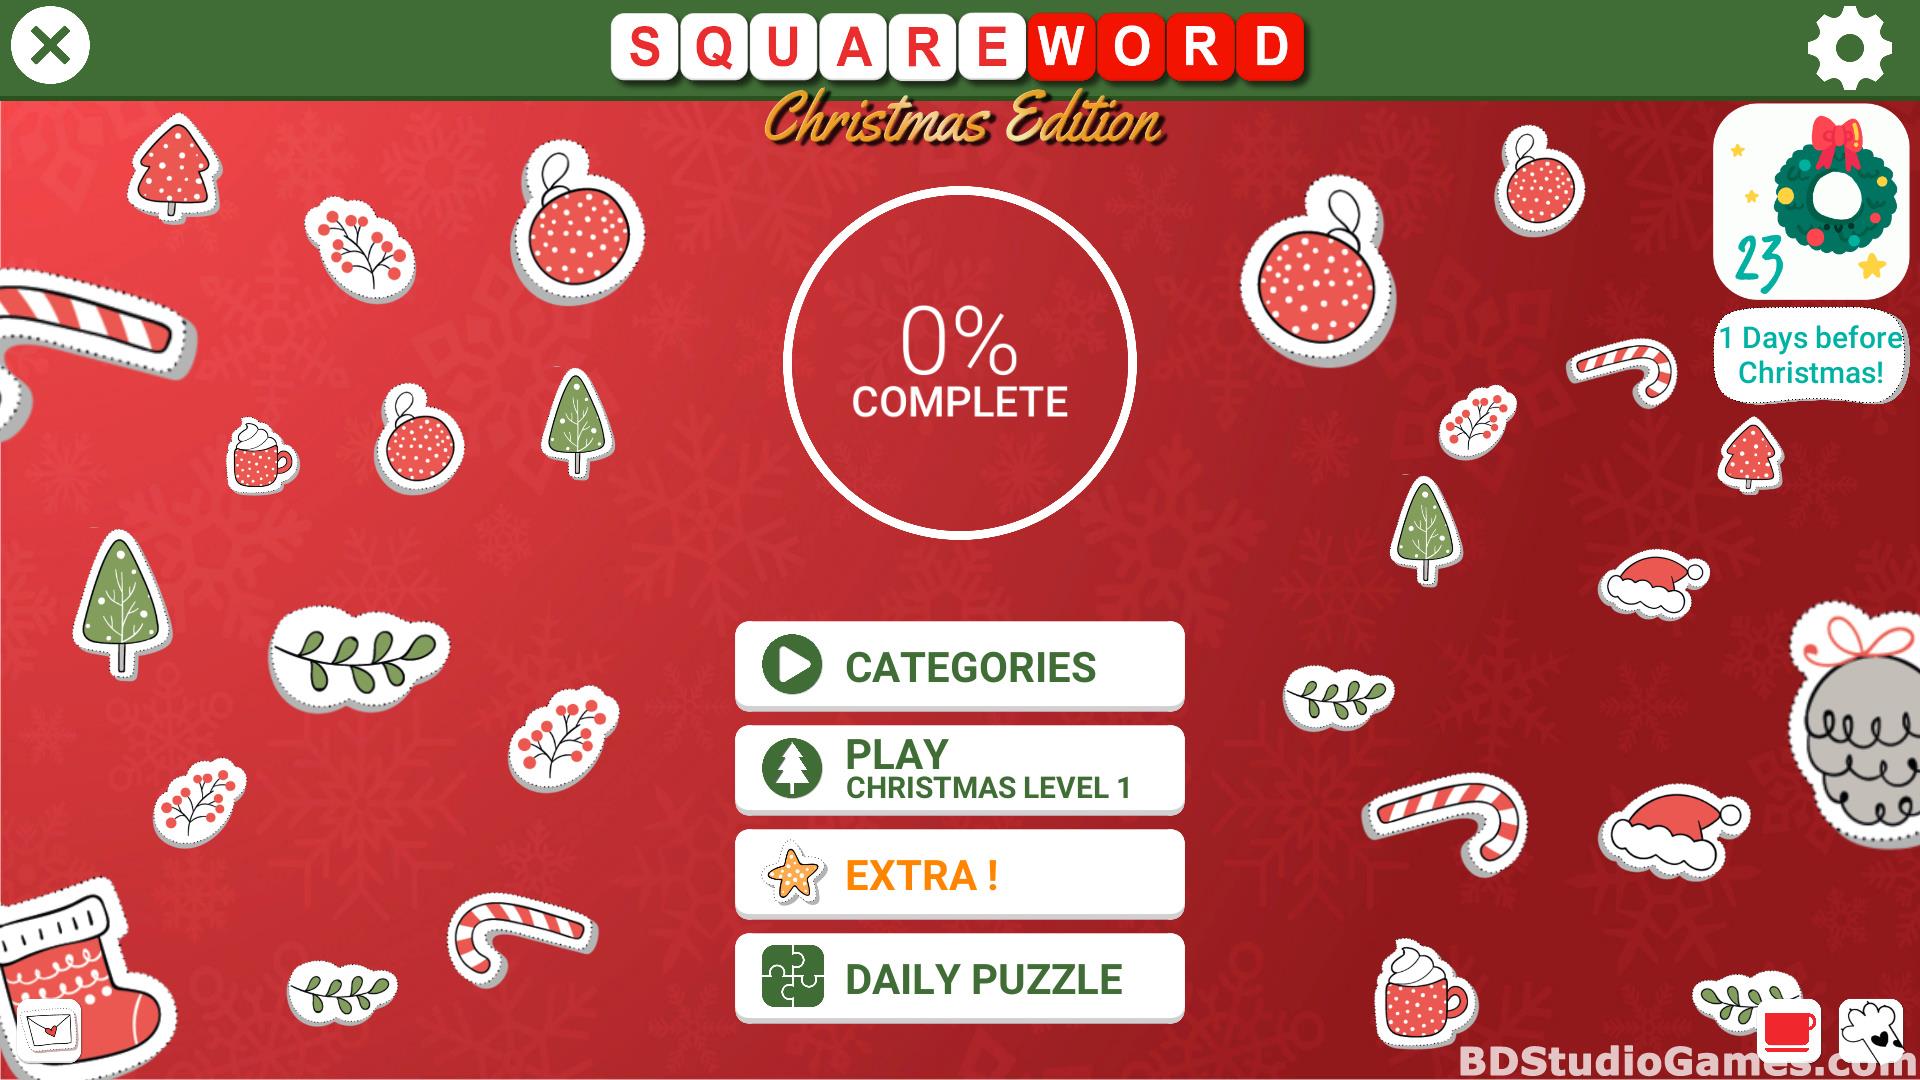 Square Word: Christmas Edition Free Download Screenshots 01